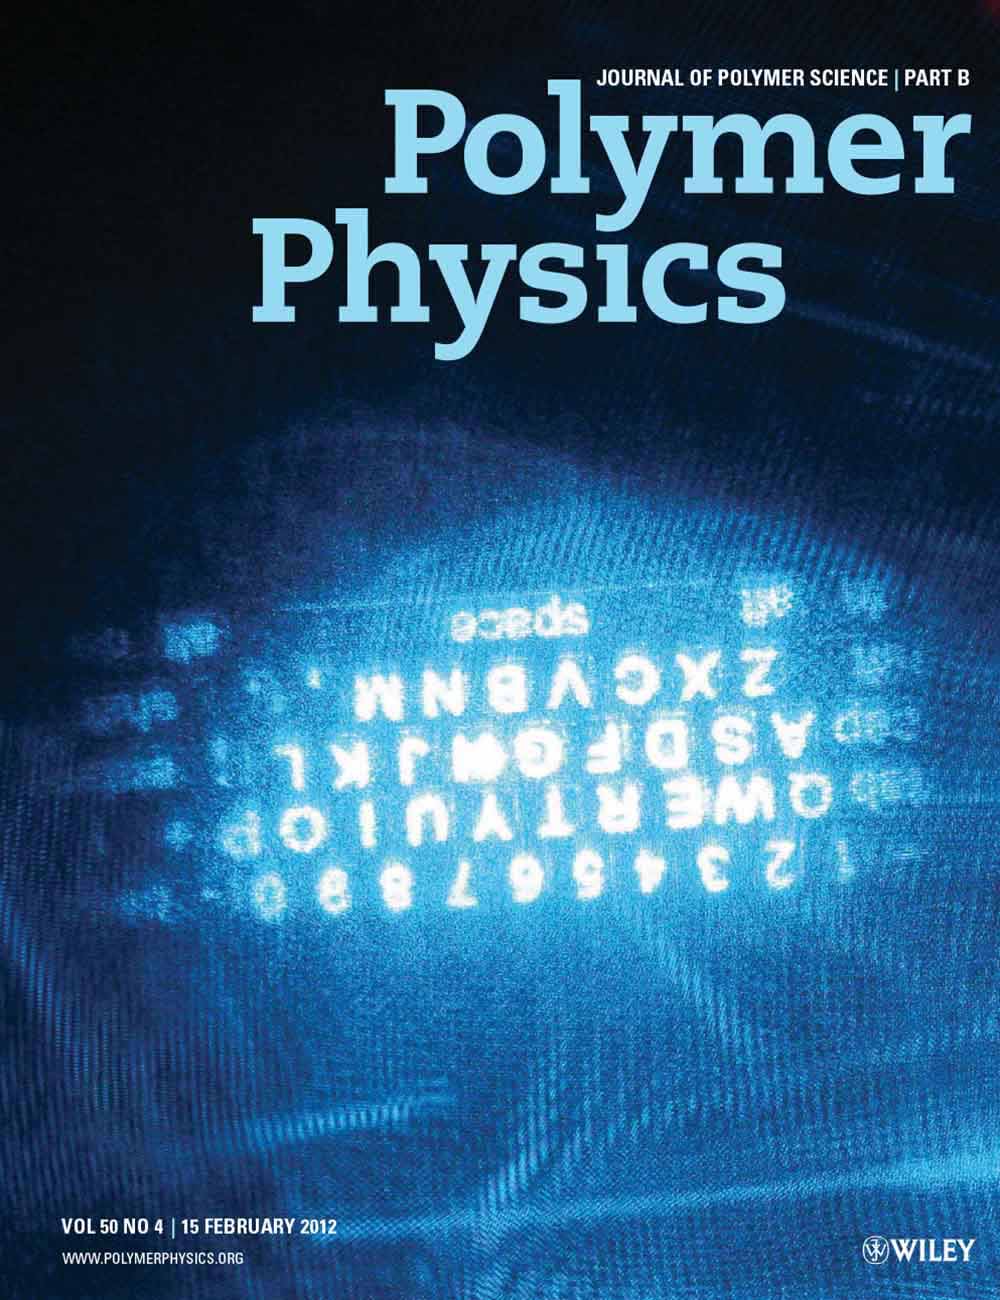 2012 Cover of Journal of Polymer Science: Polymer Physics, Volume 50, Issue 4